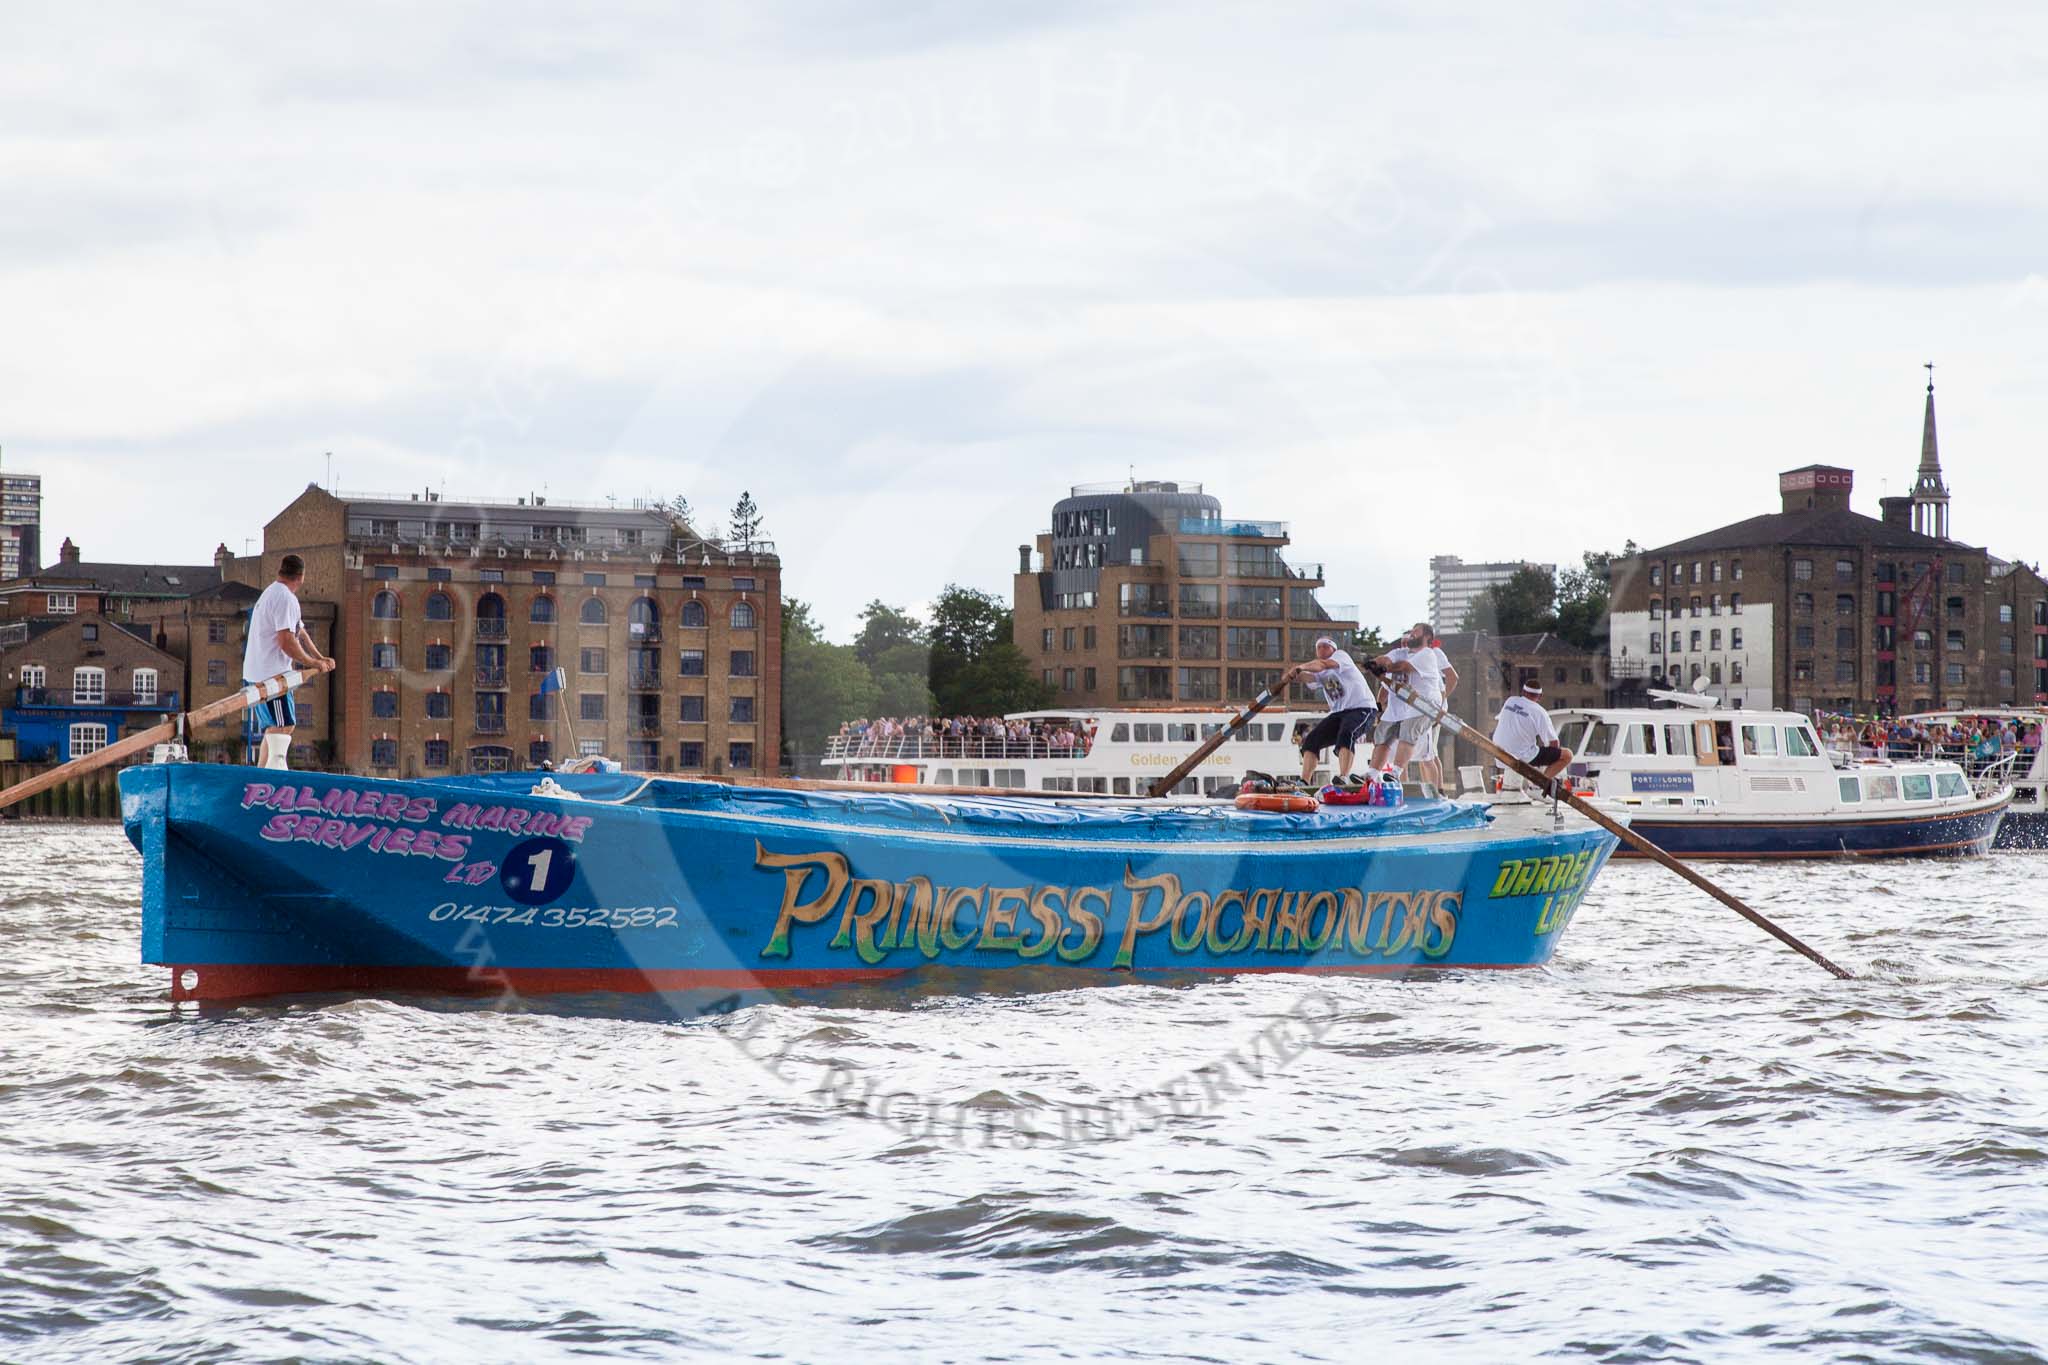 TOW River Thames Barge Driving Race 2014.
River Thames between Greenwich and Westminster,
London,

United Kingdom,
on 28 June 2014 at 13:13, image #206